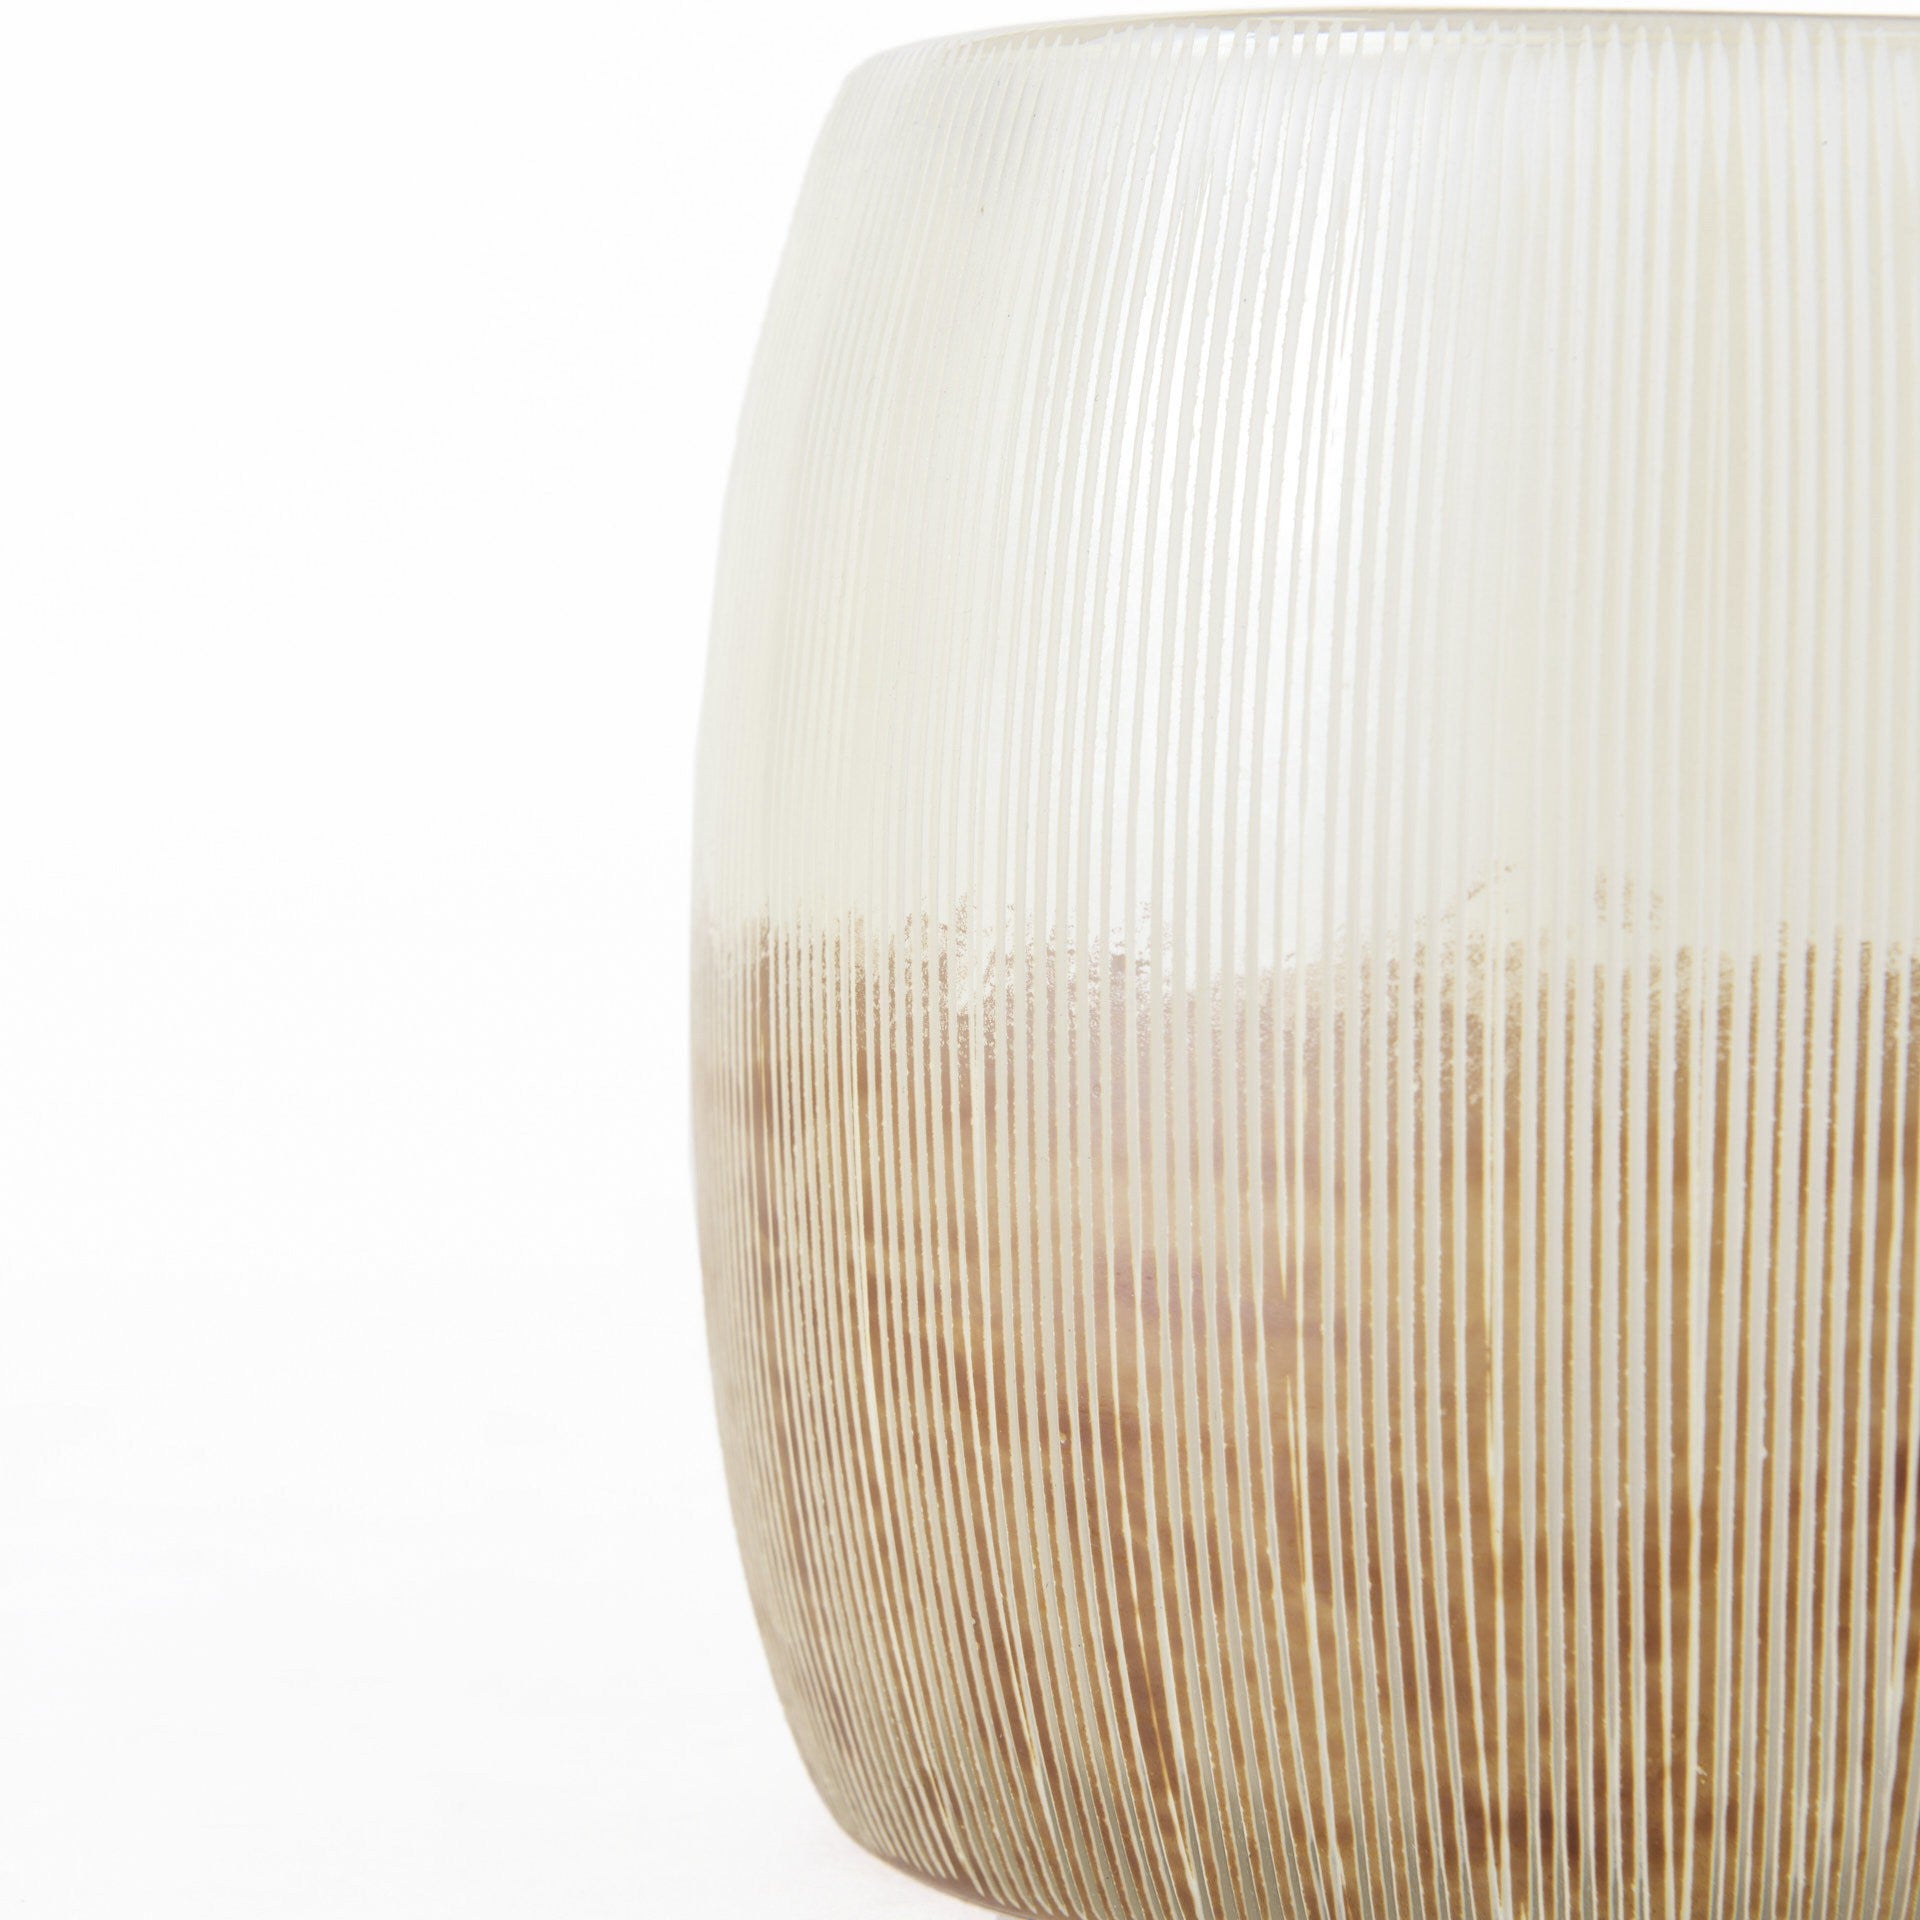 7" Creamy White and Gold Ombre Striped Long Glass Vase